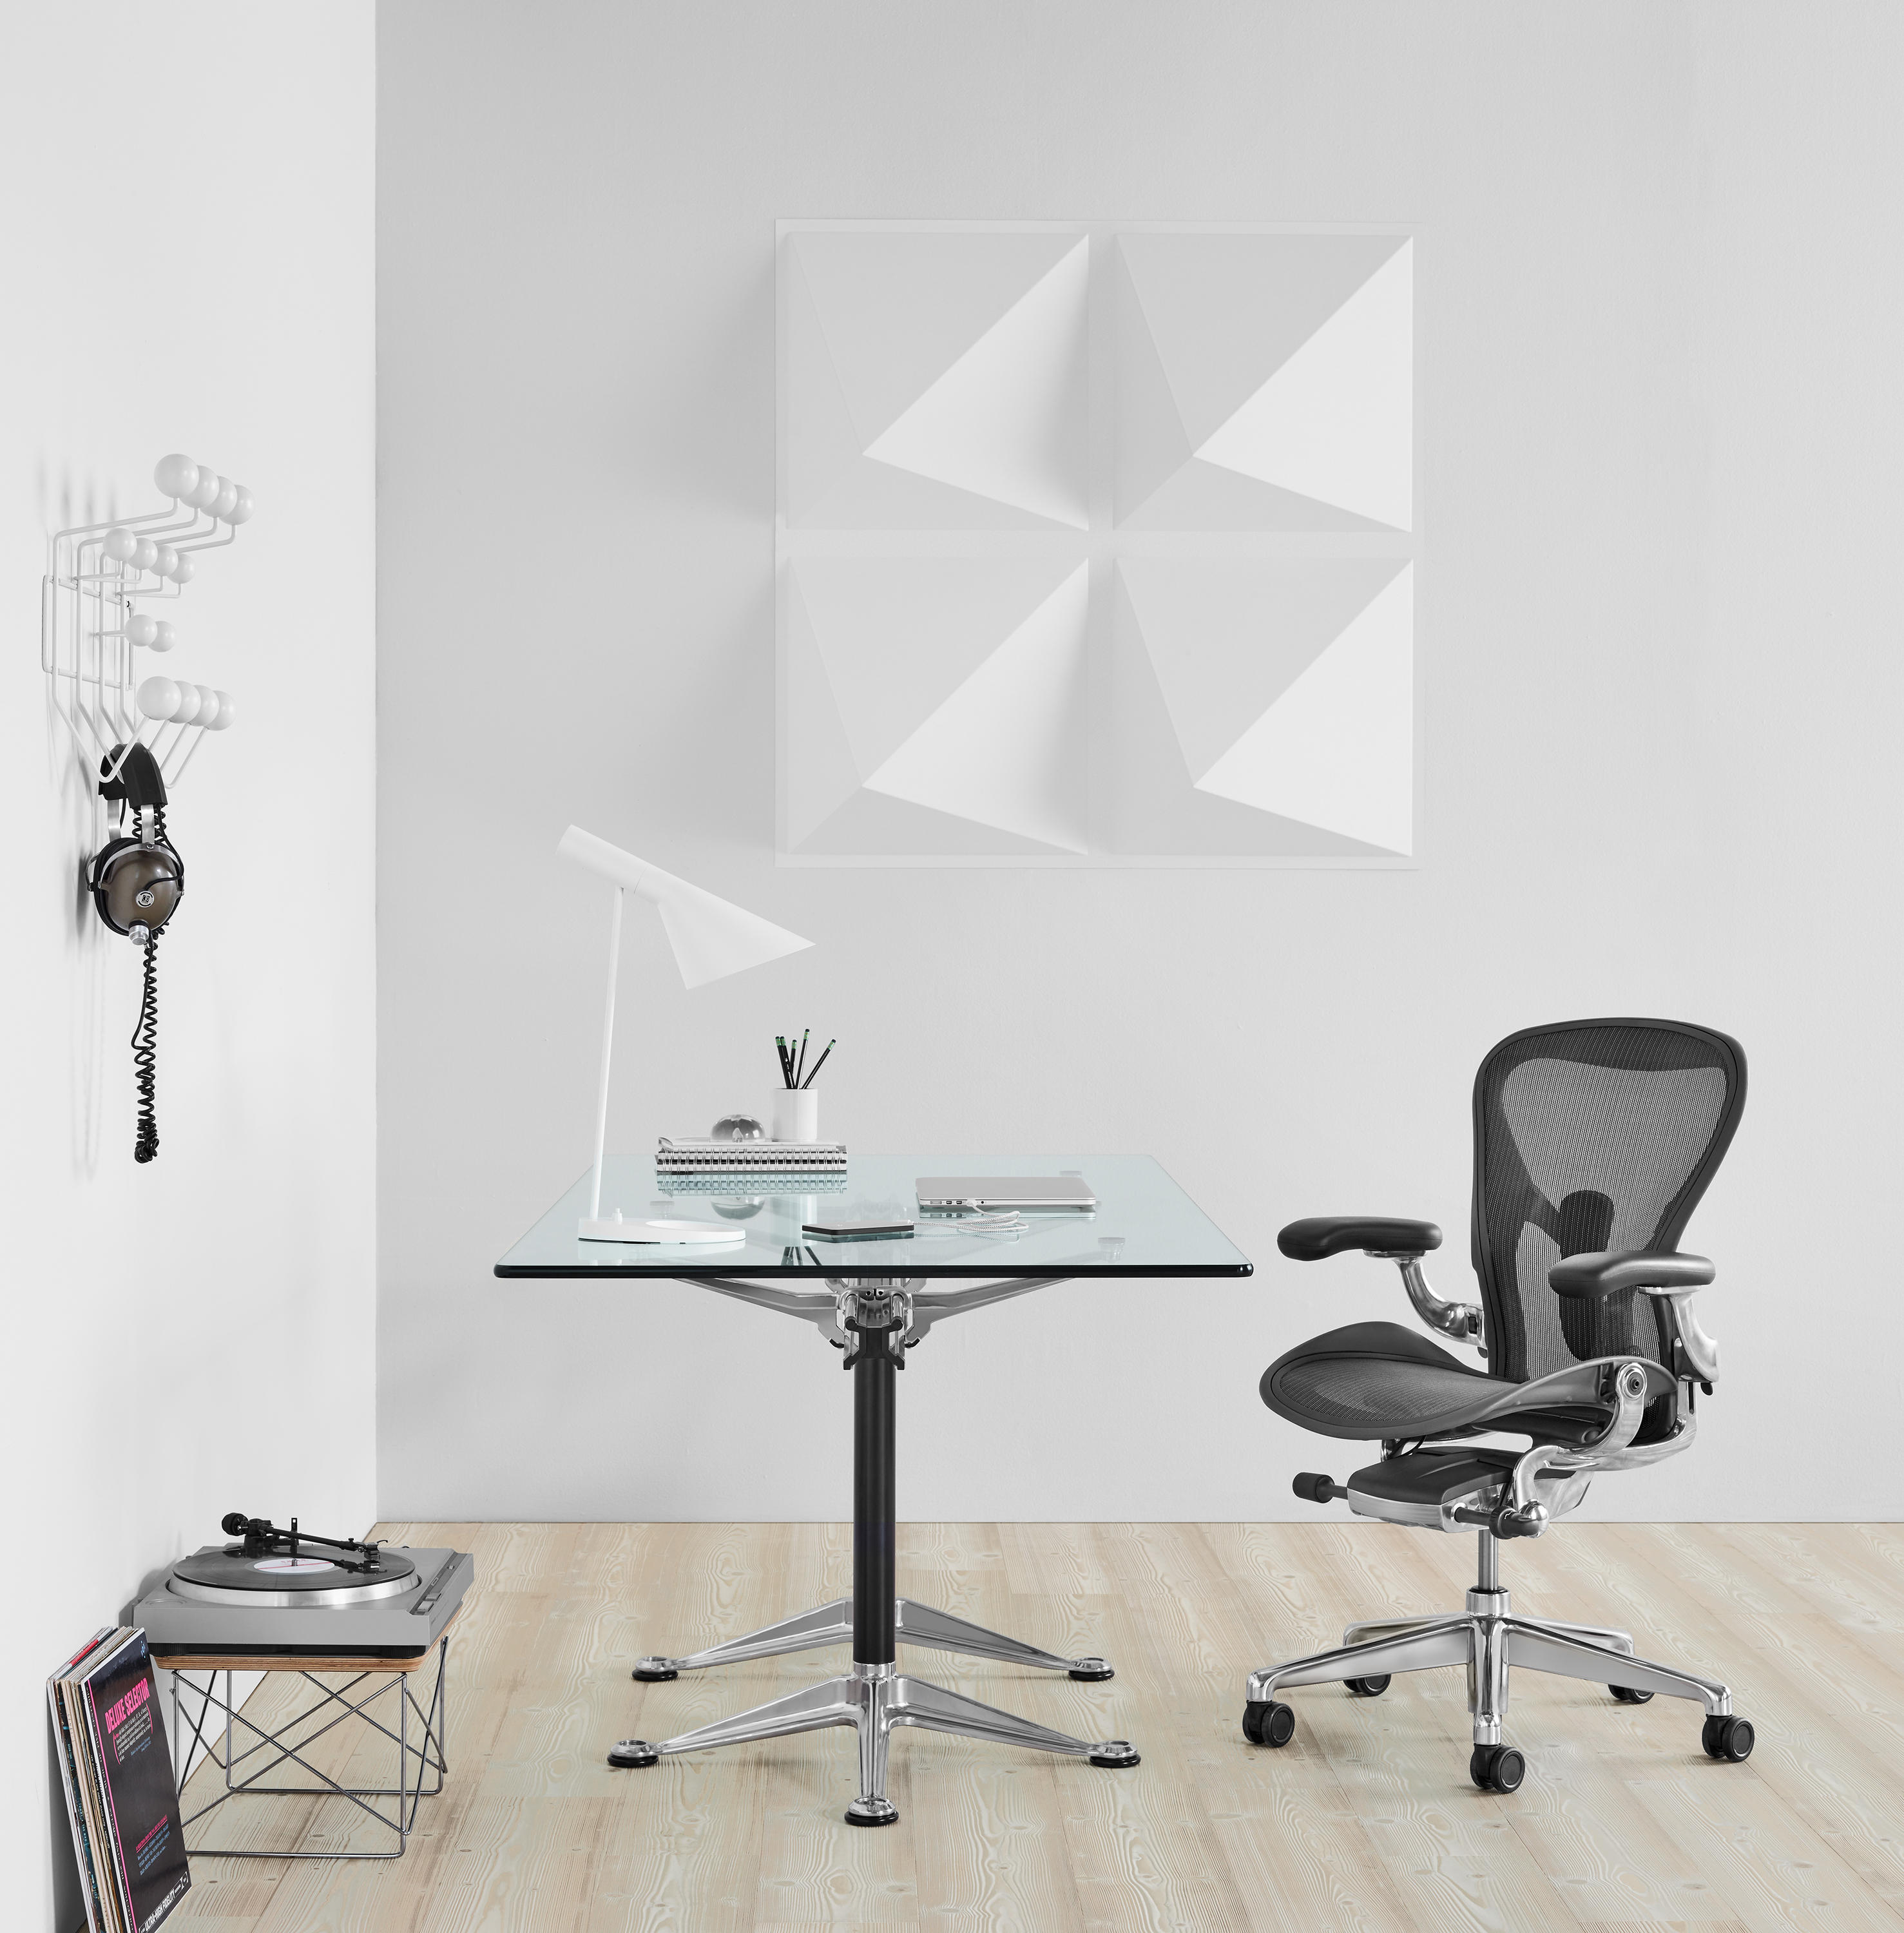 AERON CHAIR - Office chairs from Herman Miller